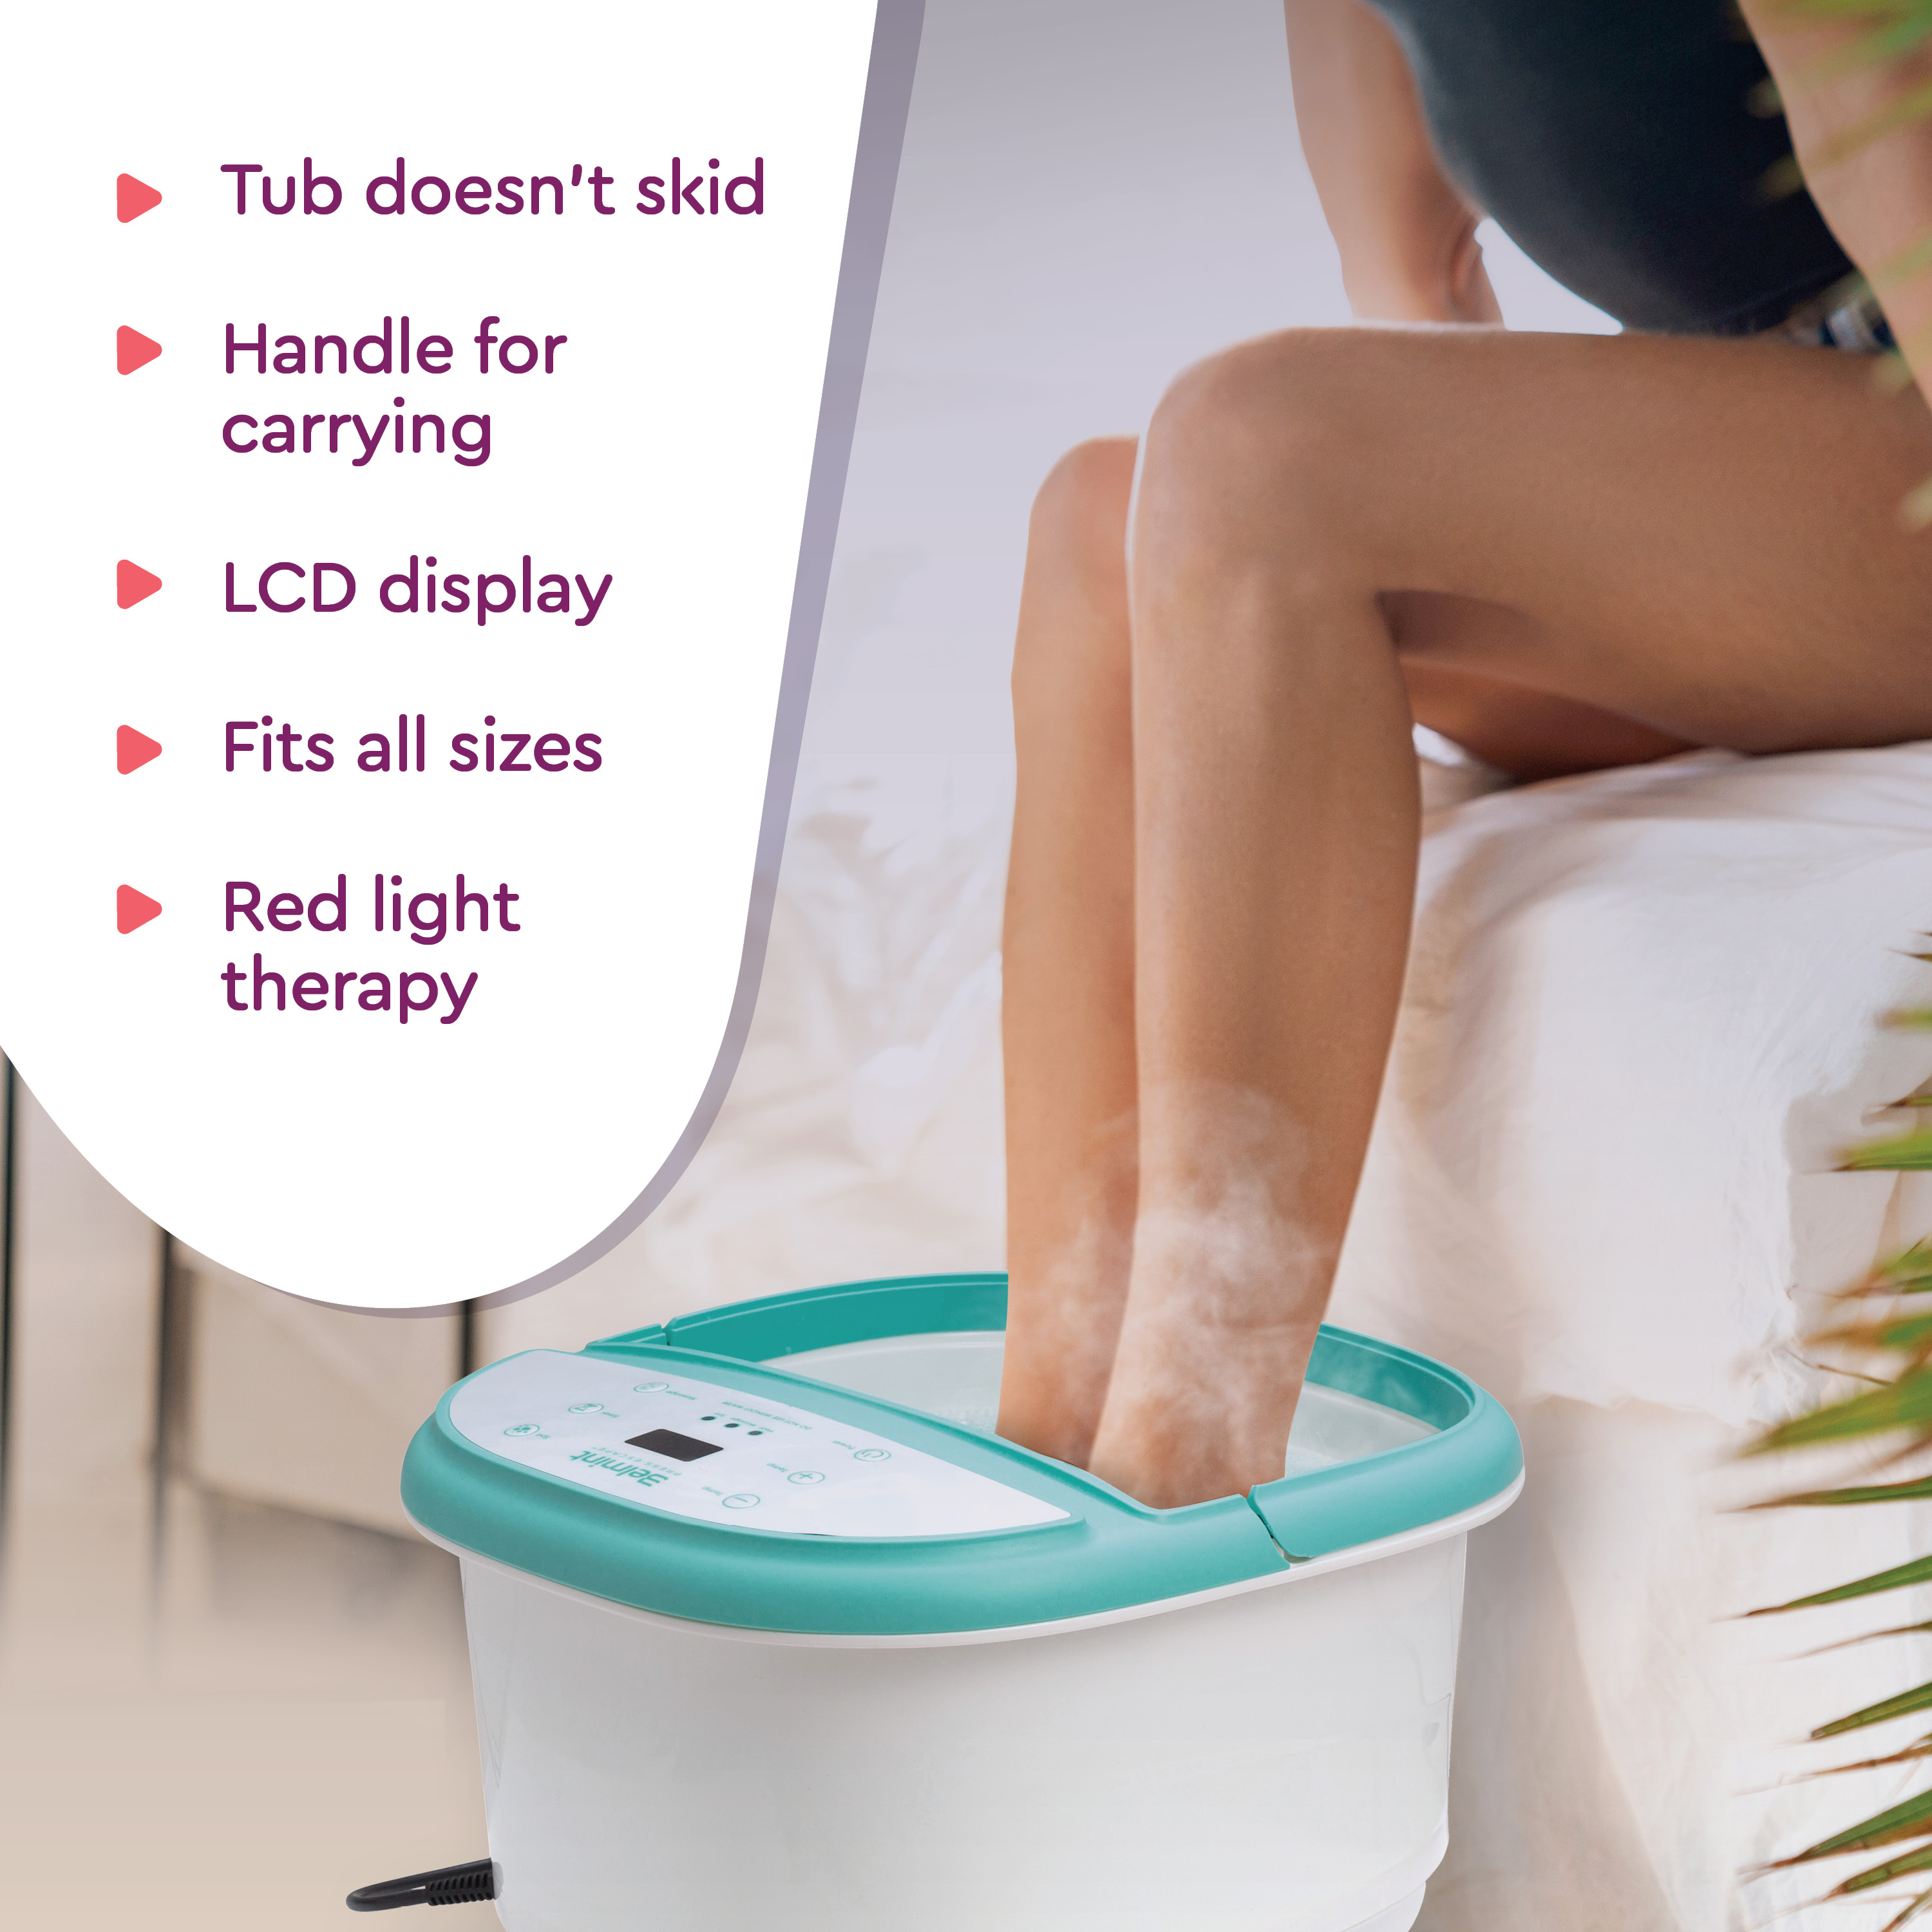 Belmint Foot Spa Bath Massager with Heat, 6 x Pressure Node Rollers, Bubbles, Foot Soaking Tub - image 4 of 8